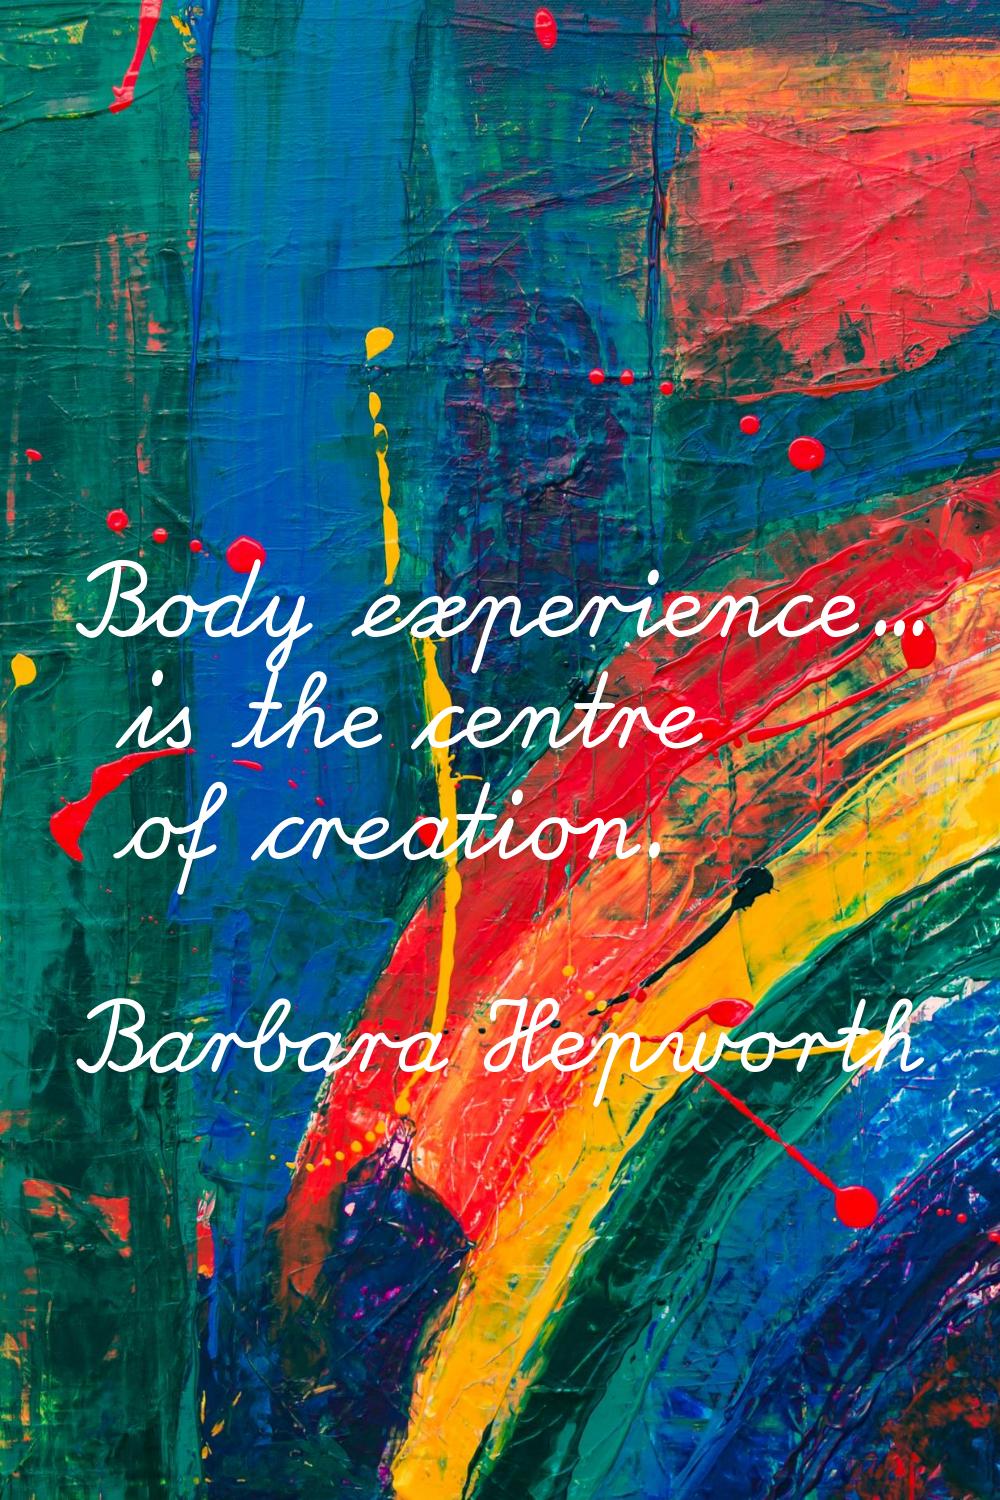 Body experience... is the centre of creation.